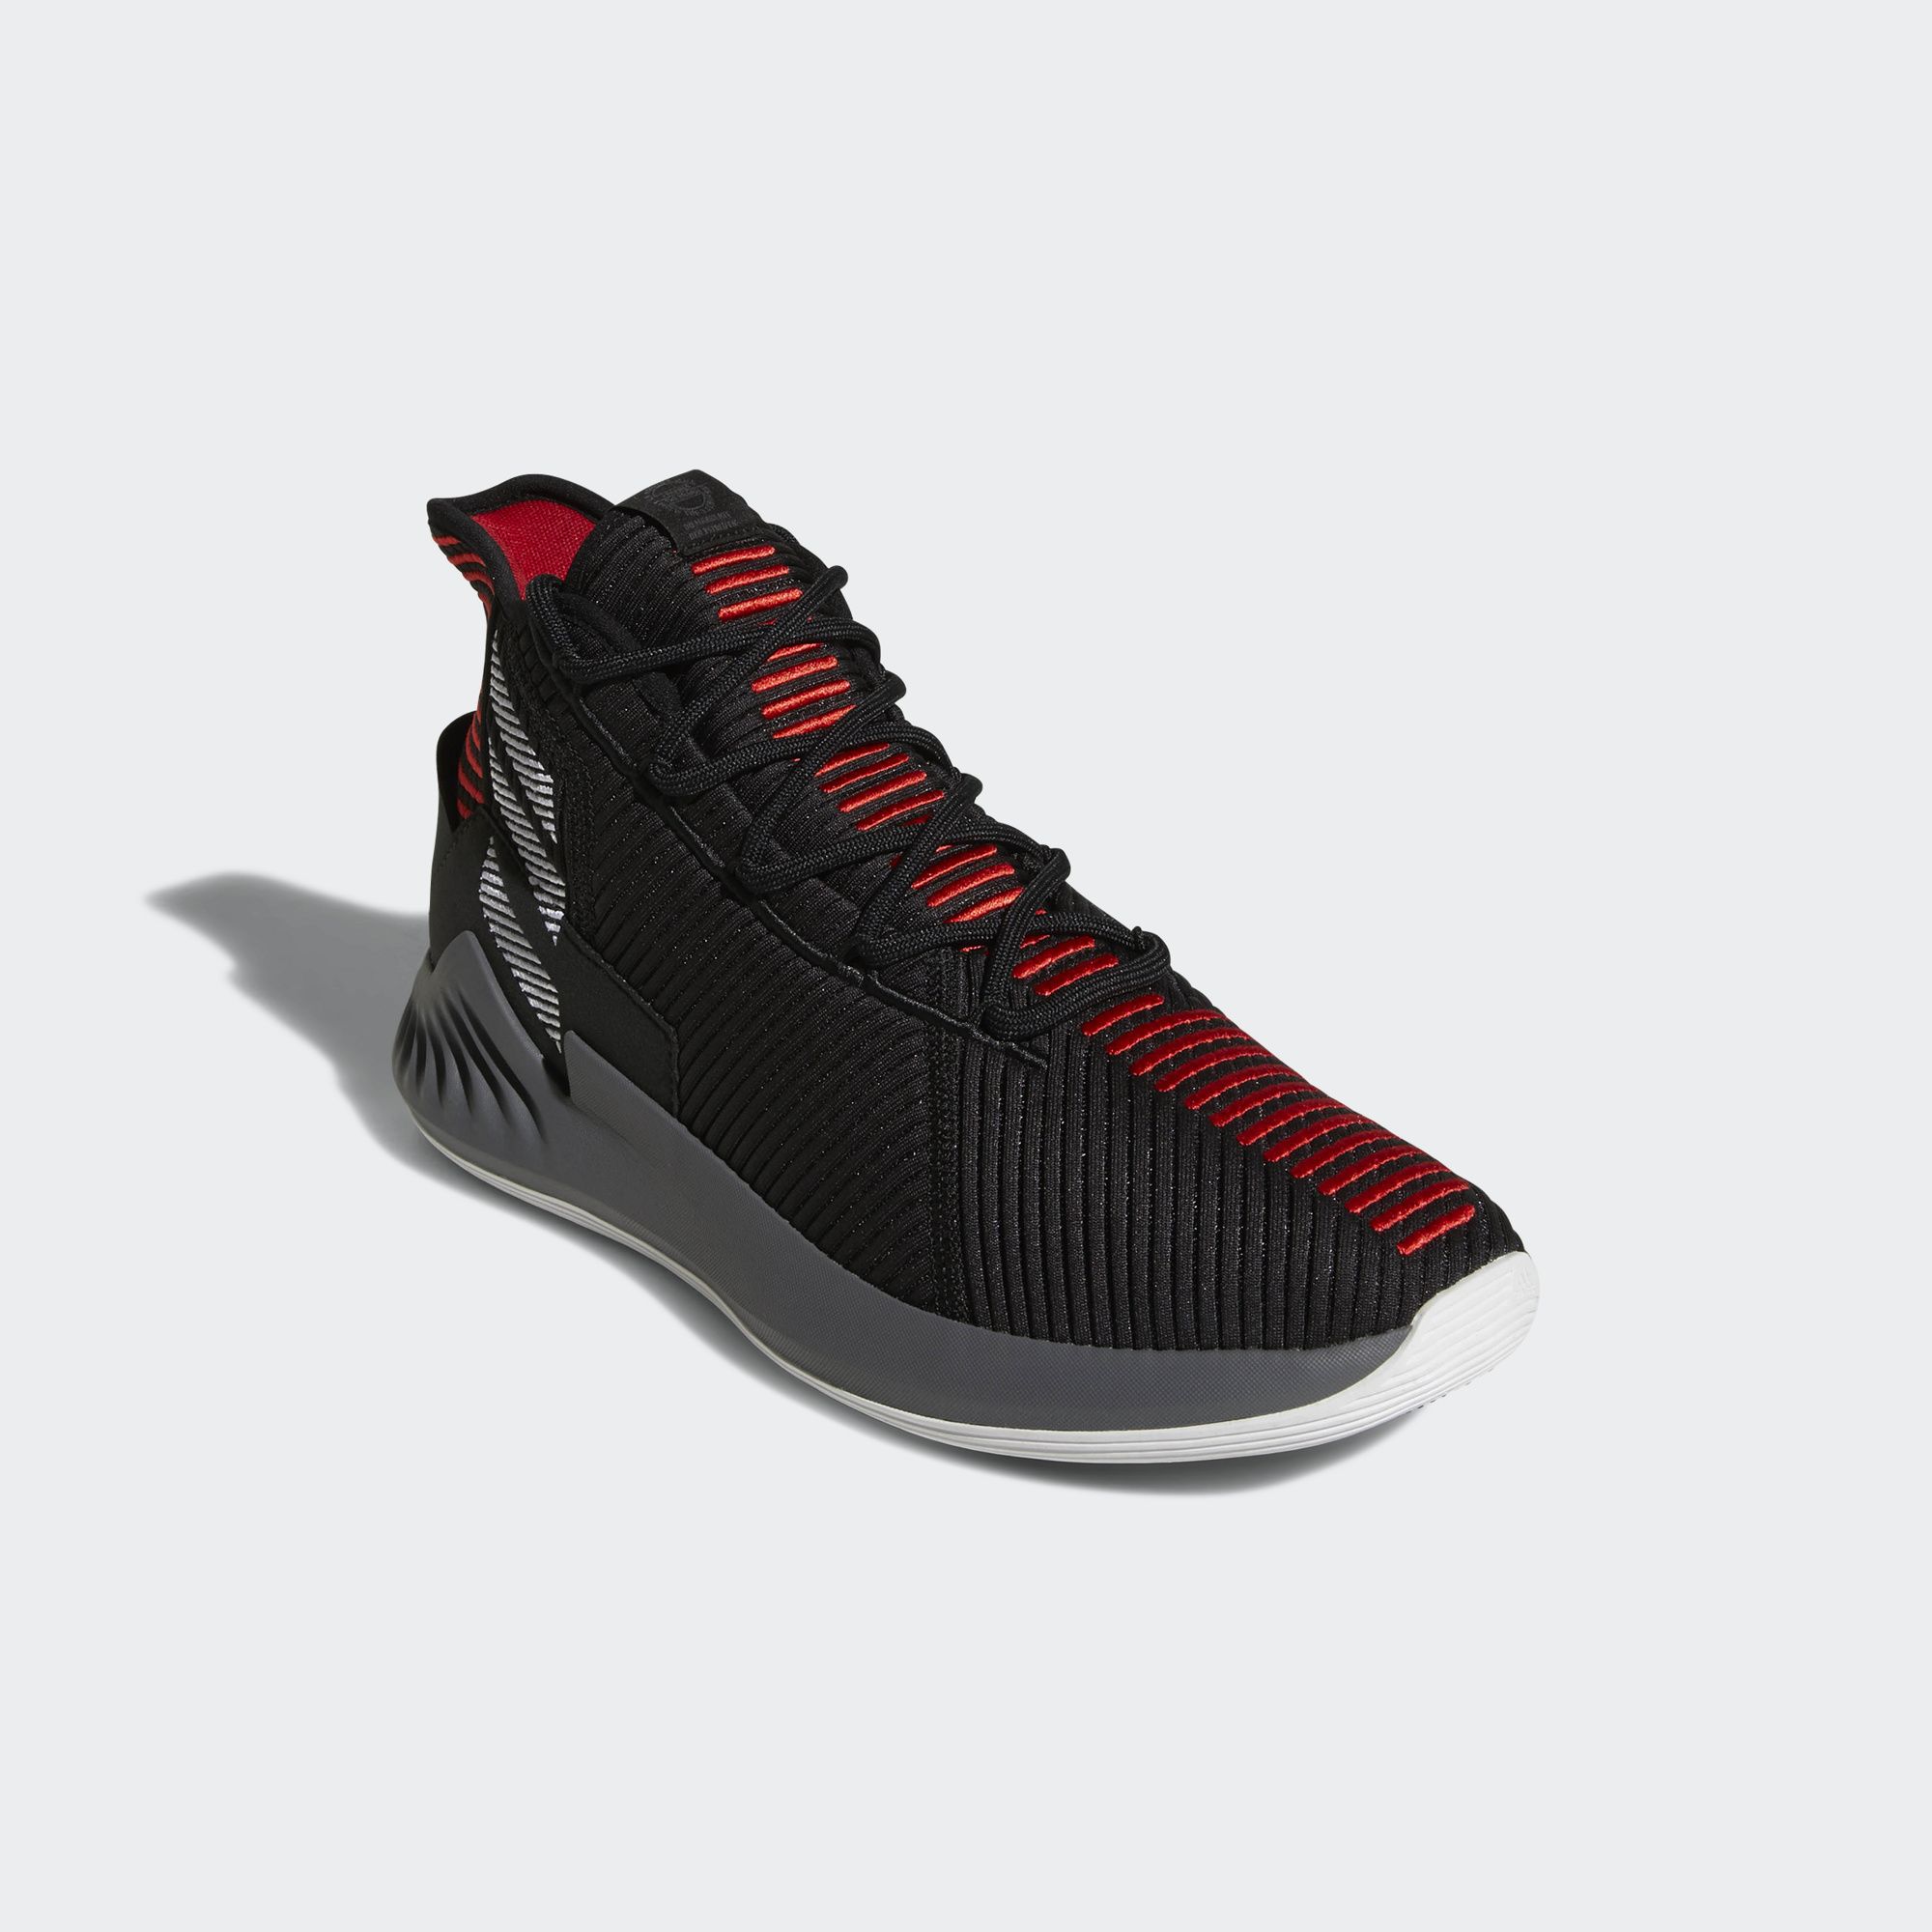 adidas rose 9 official 4